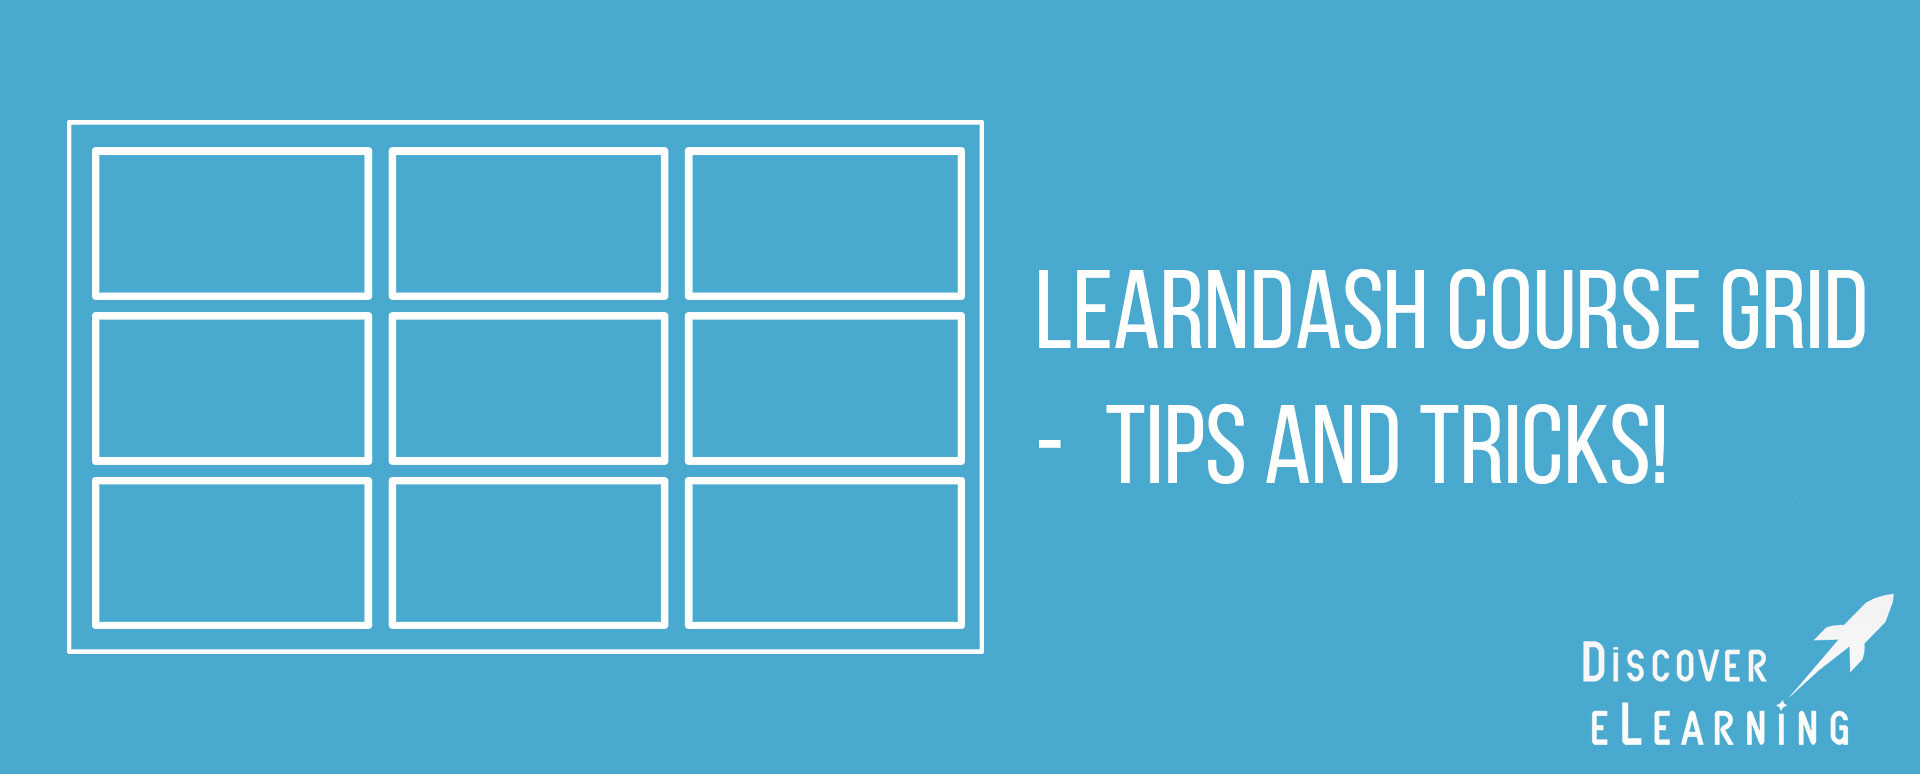 LearnDash Course Grid – How To Turn The Entire Card Into A Clickable Link